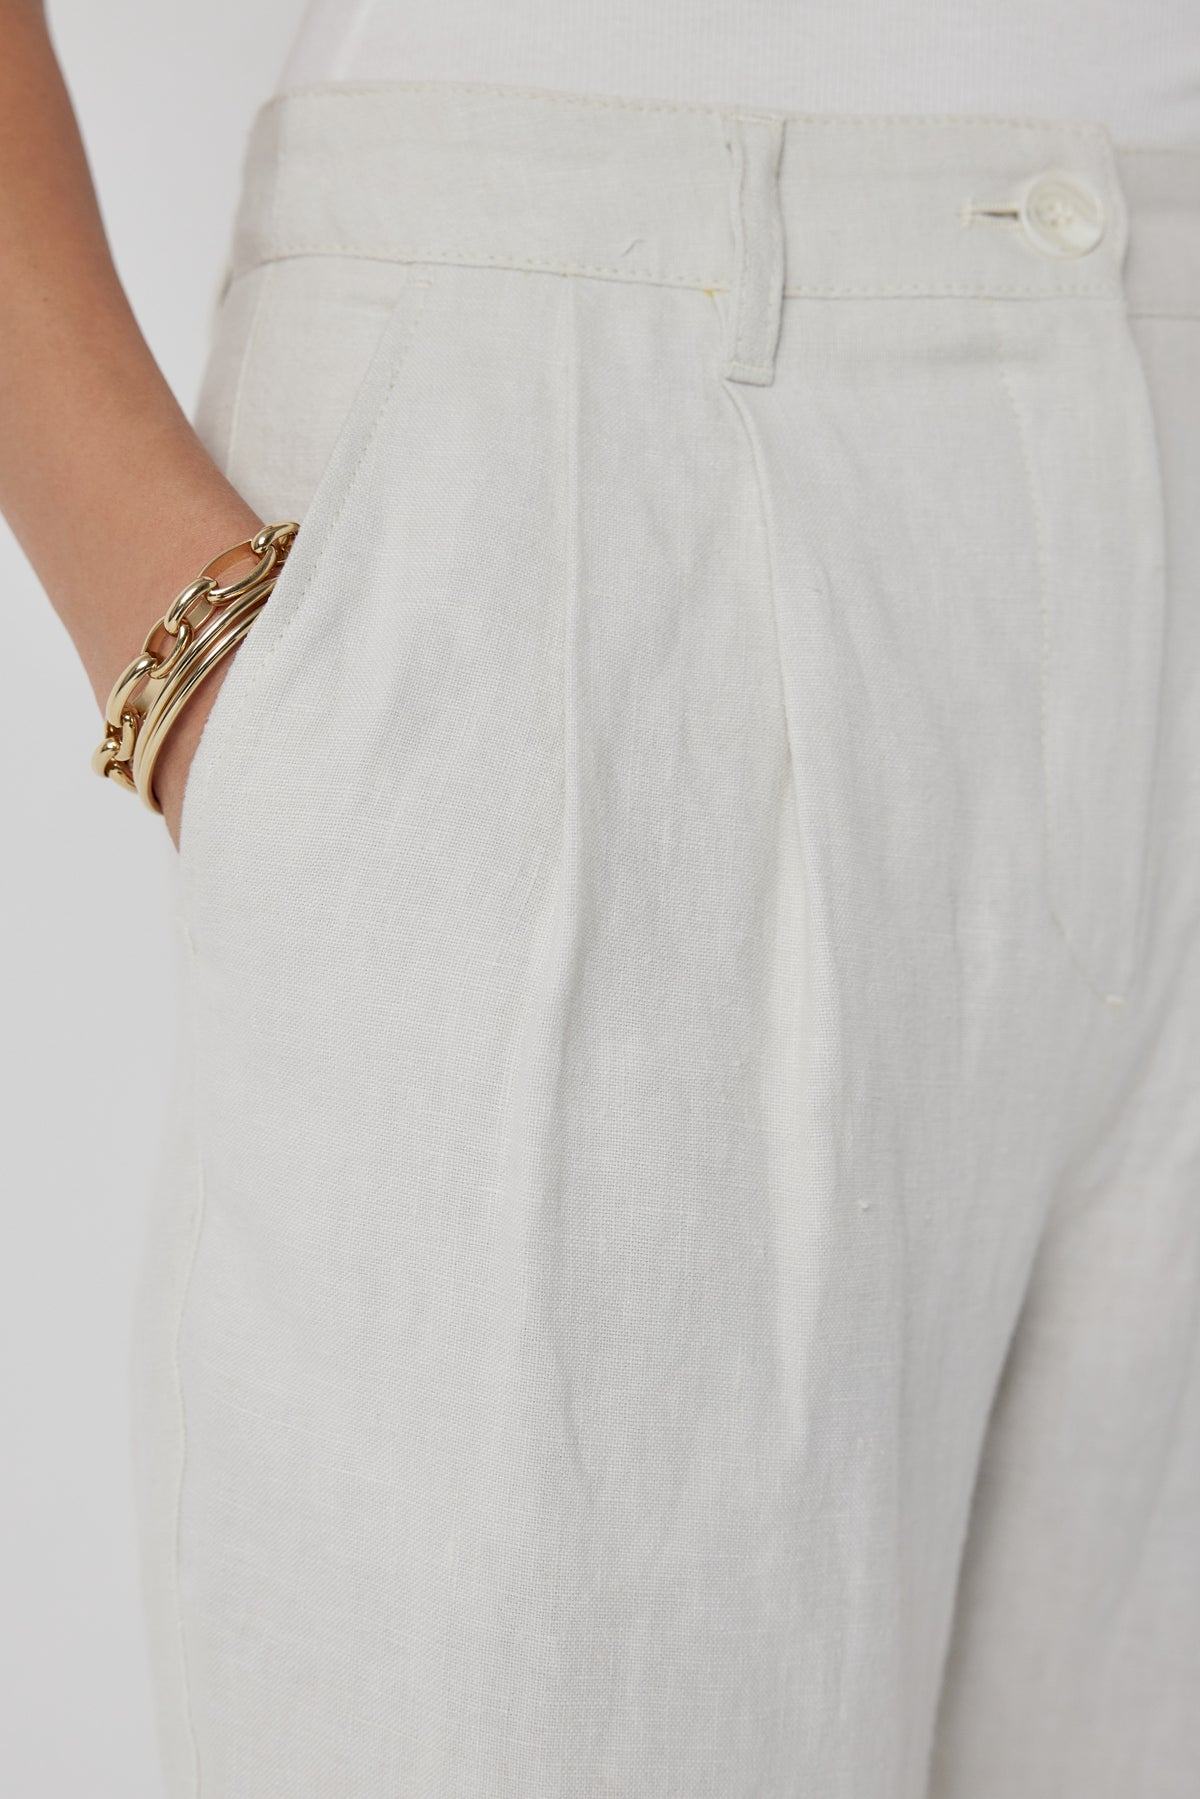   A close-up of a person wearing Velvet by Jenny Graham's POMONA PANT, white heavy-weight linen, straight-leg pants with their hand in the pocket, accessorized with gold bangle bracelets. 